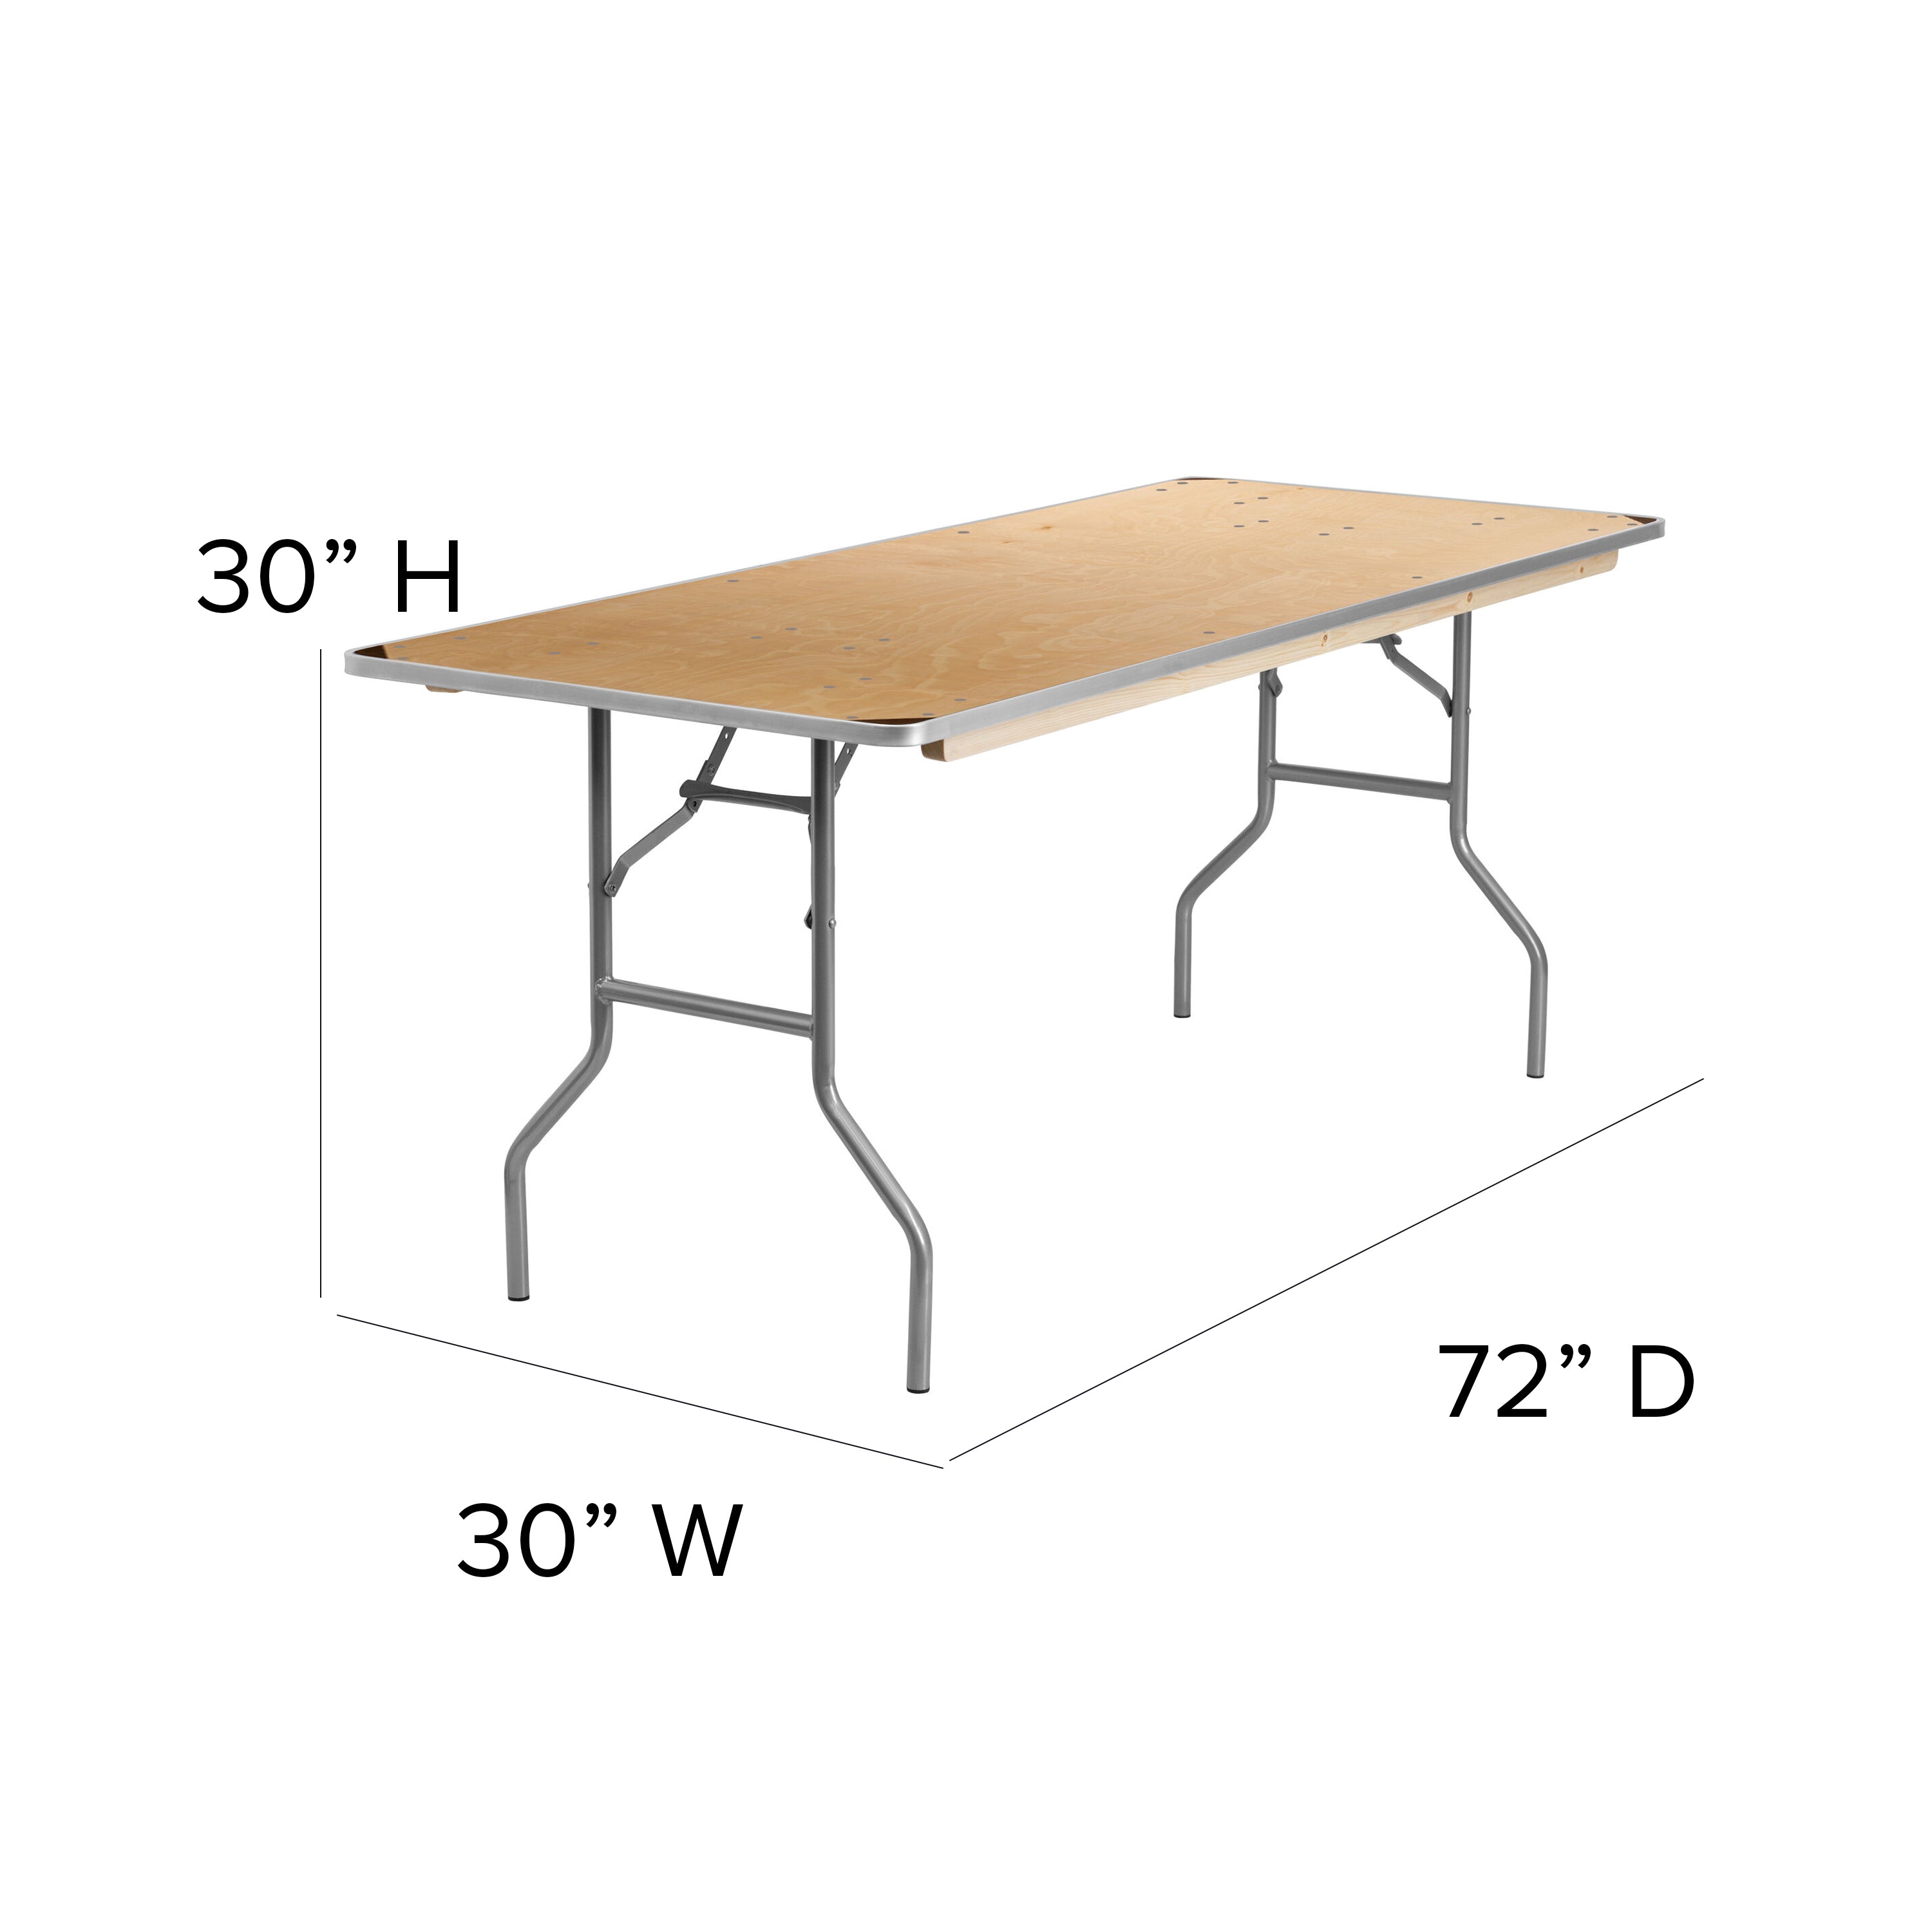 6-Foot Rectangular HEAVY DUTY Birchwood Folding Banquet Table with METAL Edges and Protective Corner Guards-Rectangular Folding Table-Flash Furniture-Wall2Wall Furnishings